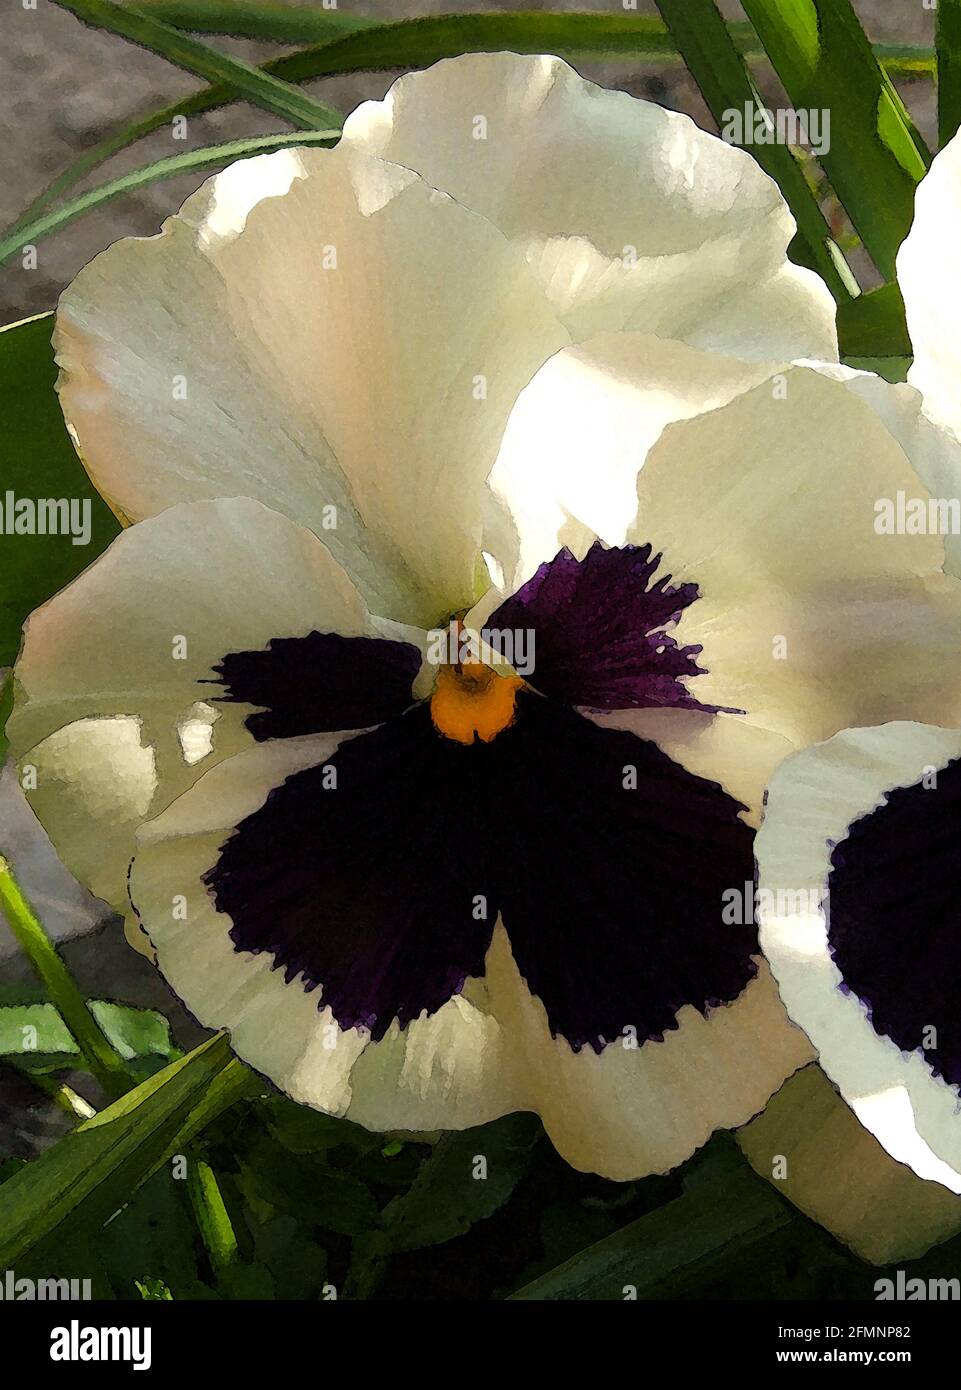 Pansy (Viola x wittrockiana) 'Floral Dance Series.' One of Forty-two Iconic Images of English Garden Flowers, Wildflowers and Rural Landscapes. Stock Photo